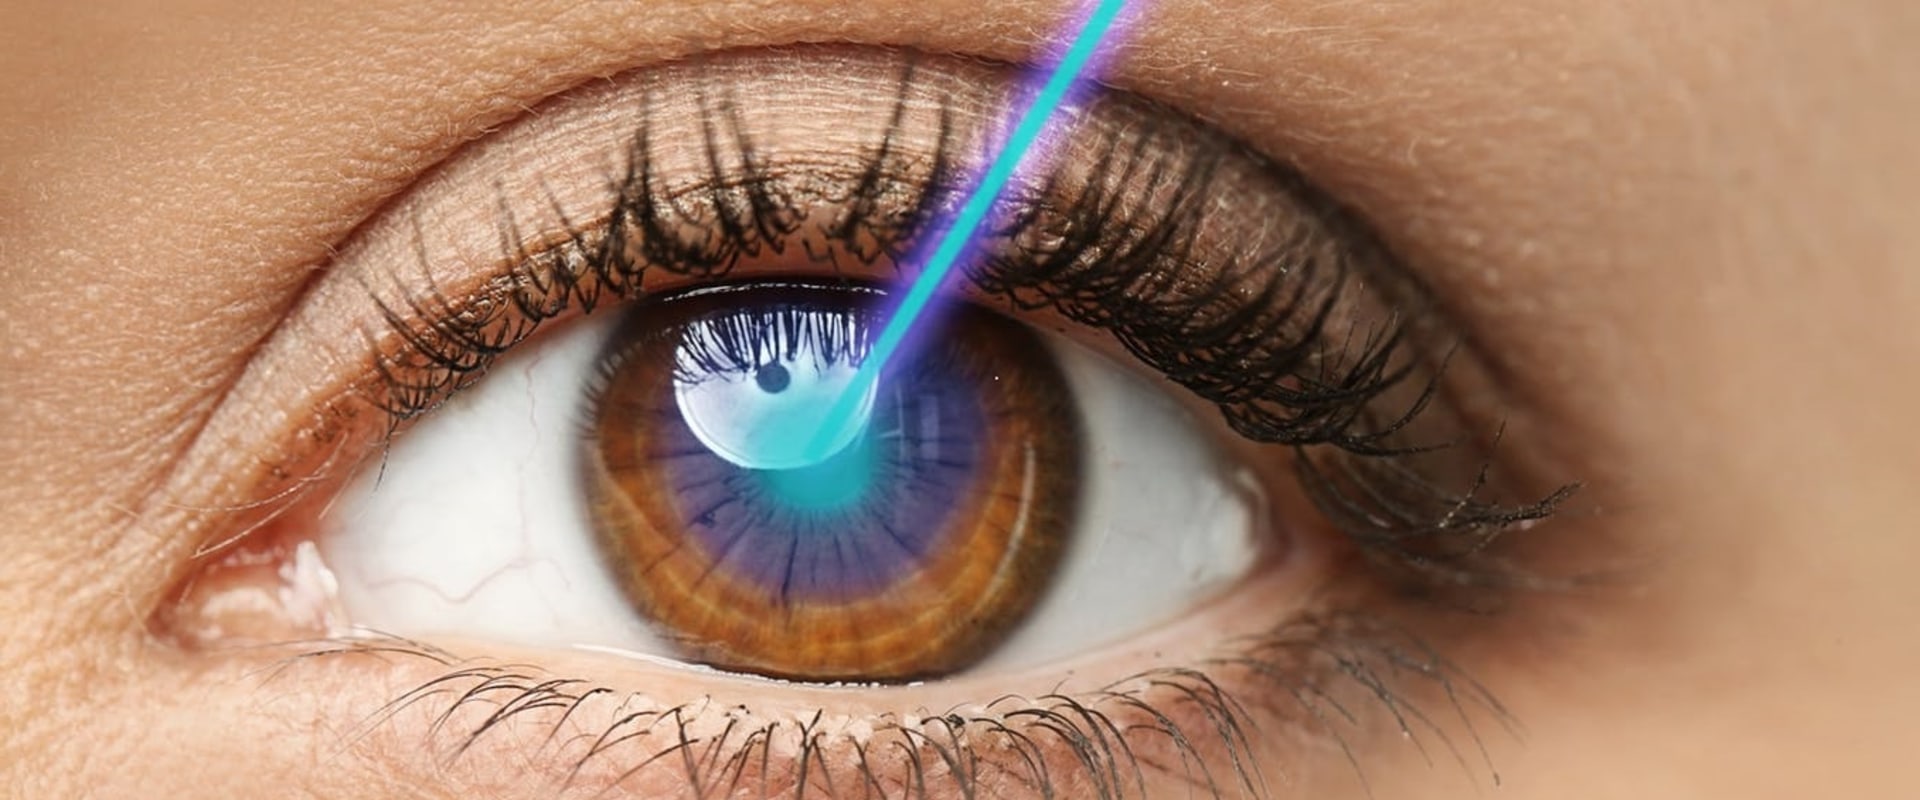 Can Overcorrection After LASIK Be Corrected?